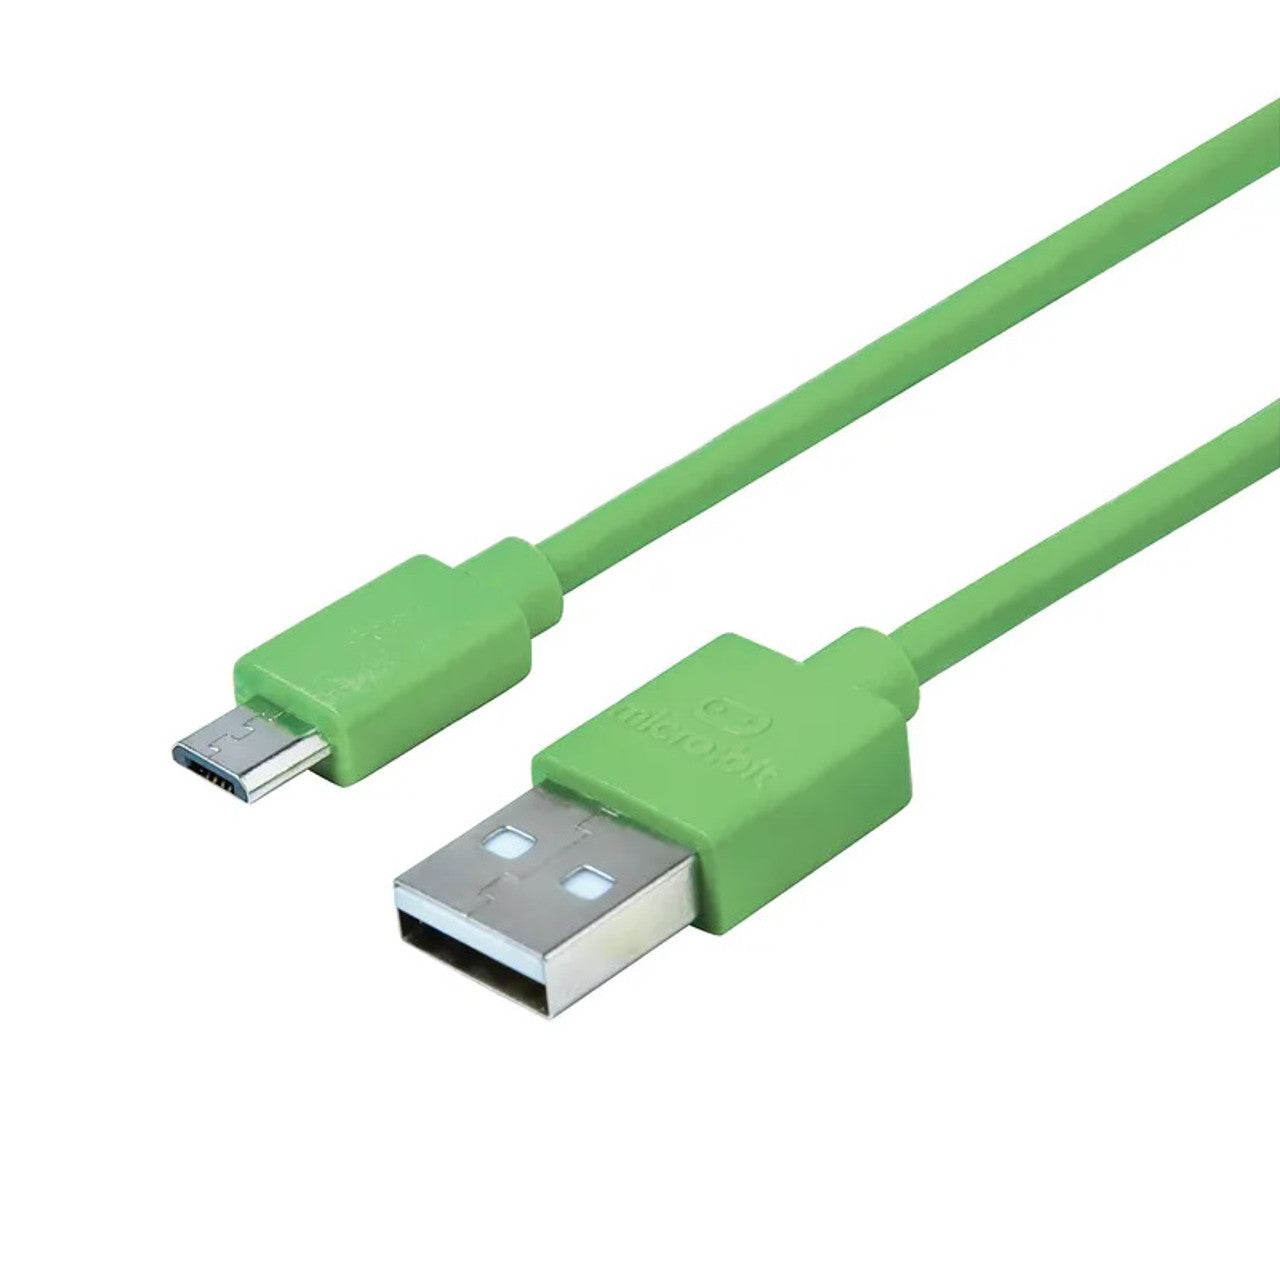 Official micro:bit USB Lead Cable (Green)